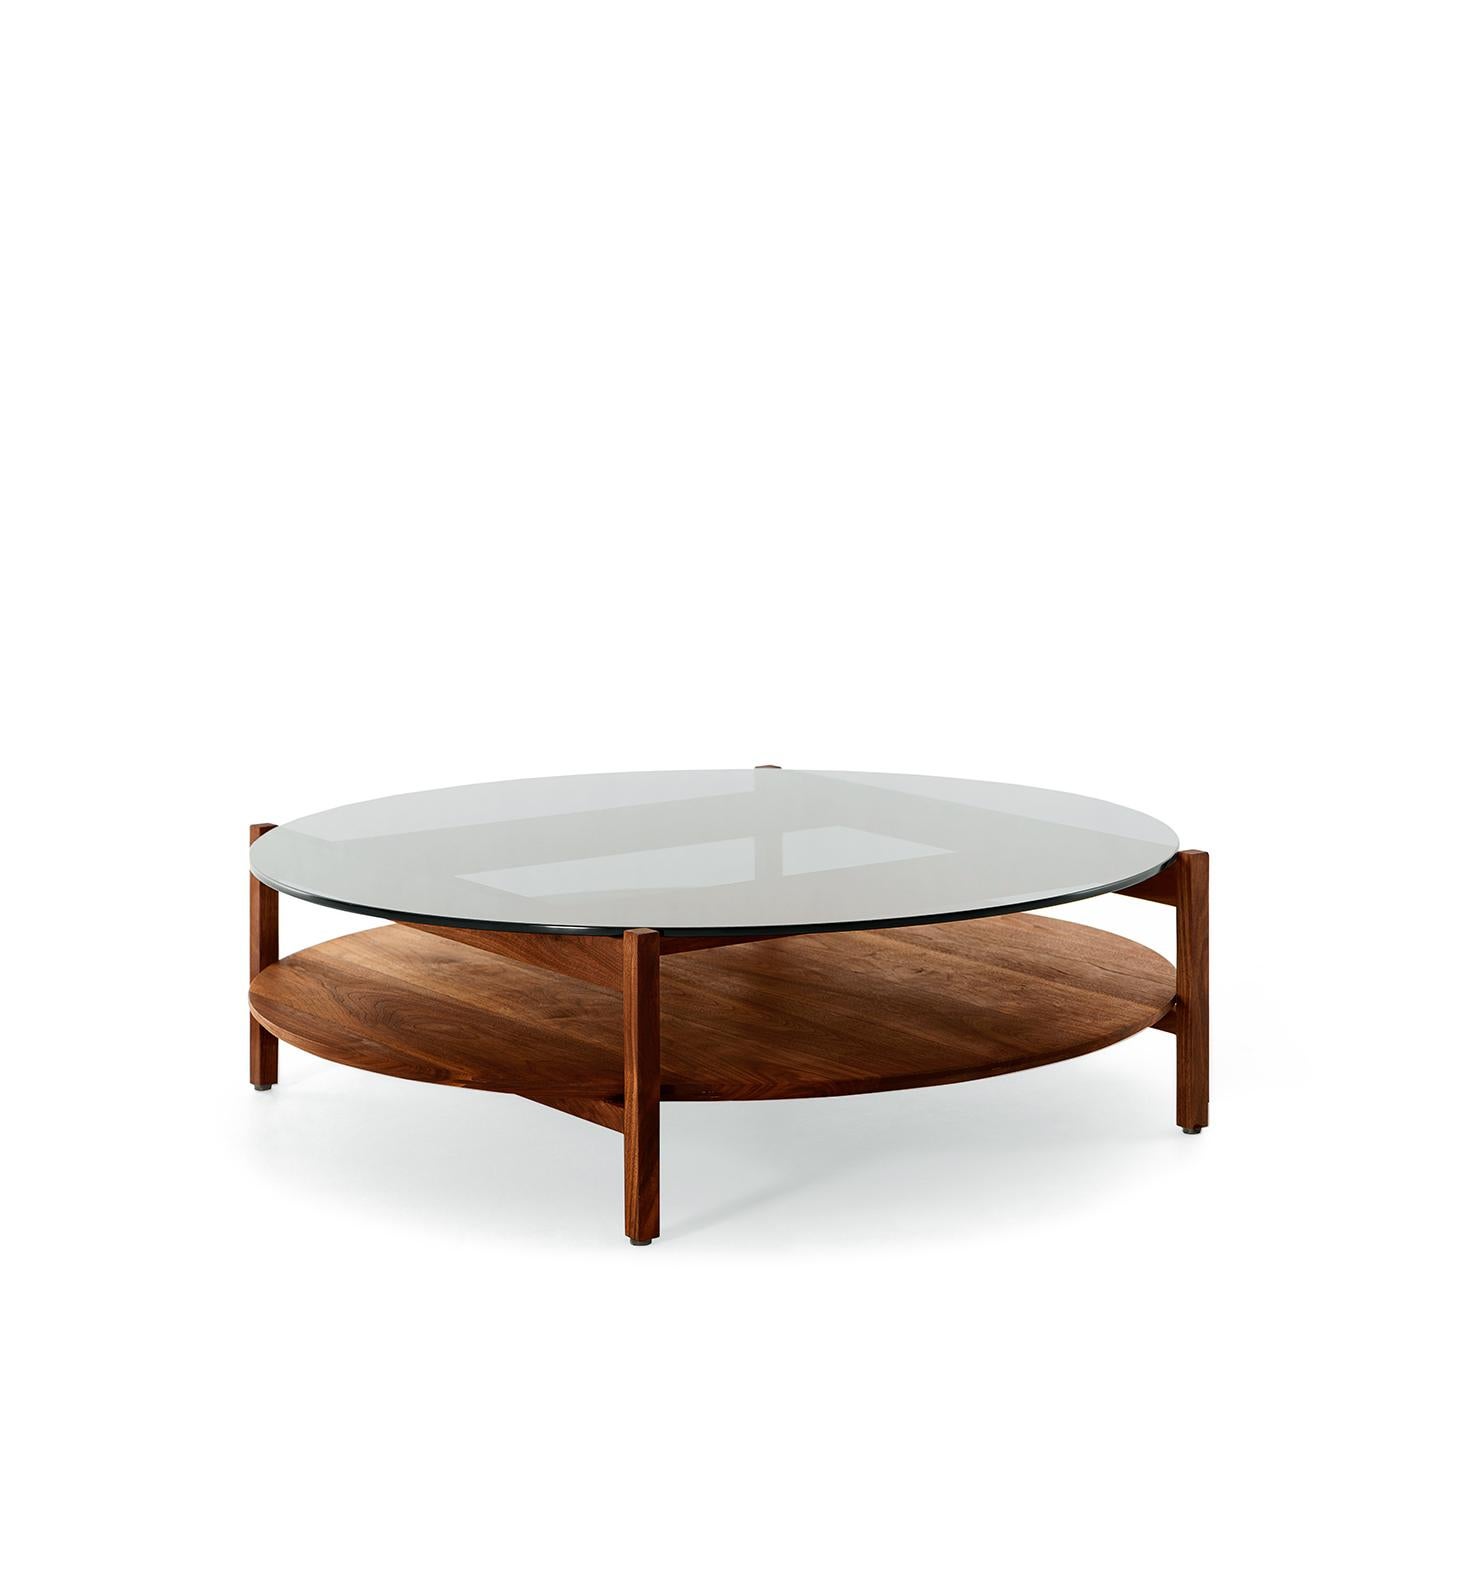 Hand-Crafted Coffee Table DEDO, Mexican Contemporary Design by Emiliano Molina for CU For Sale